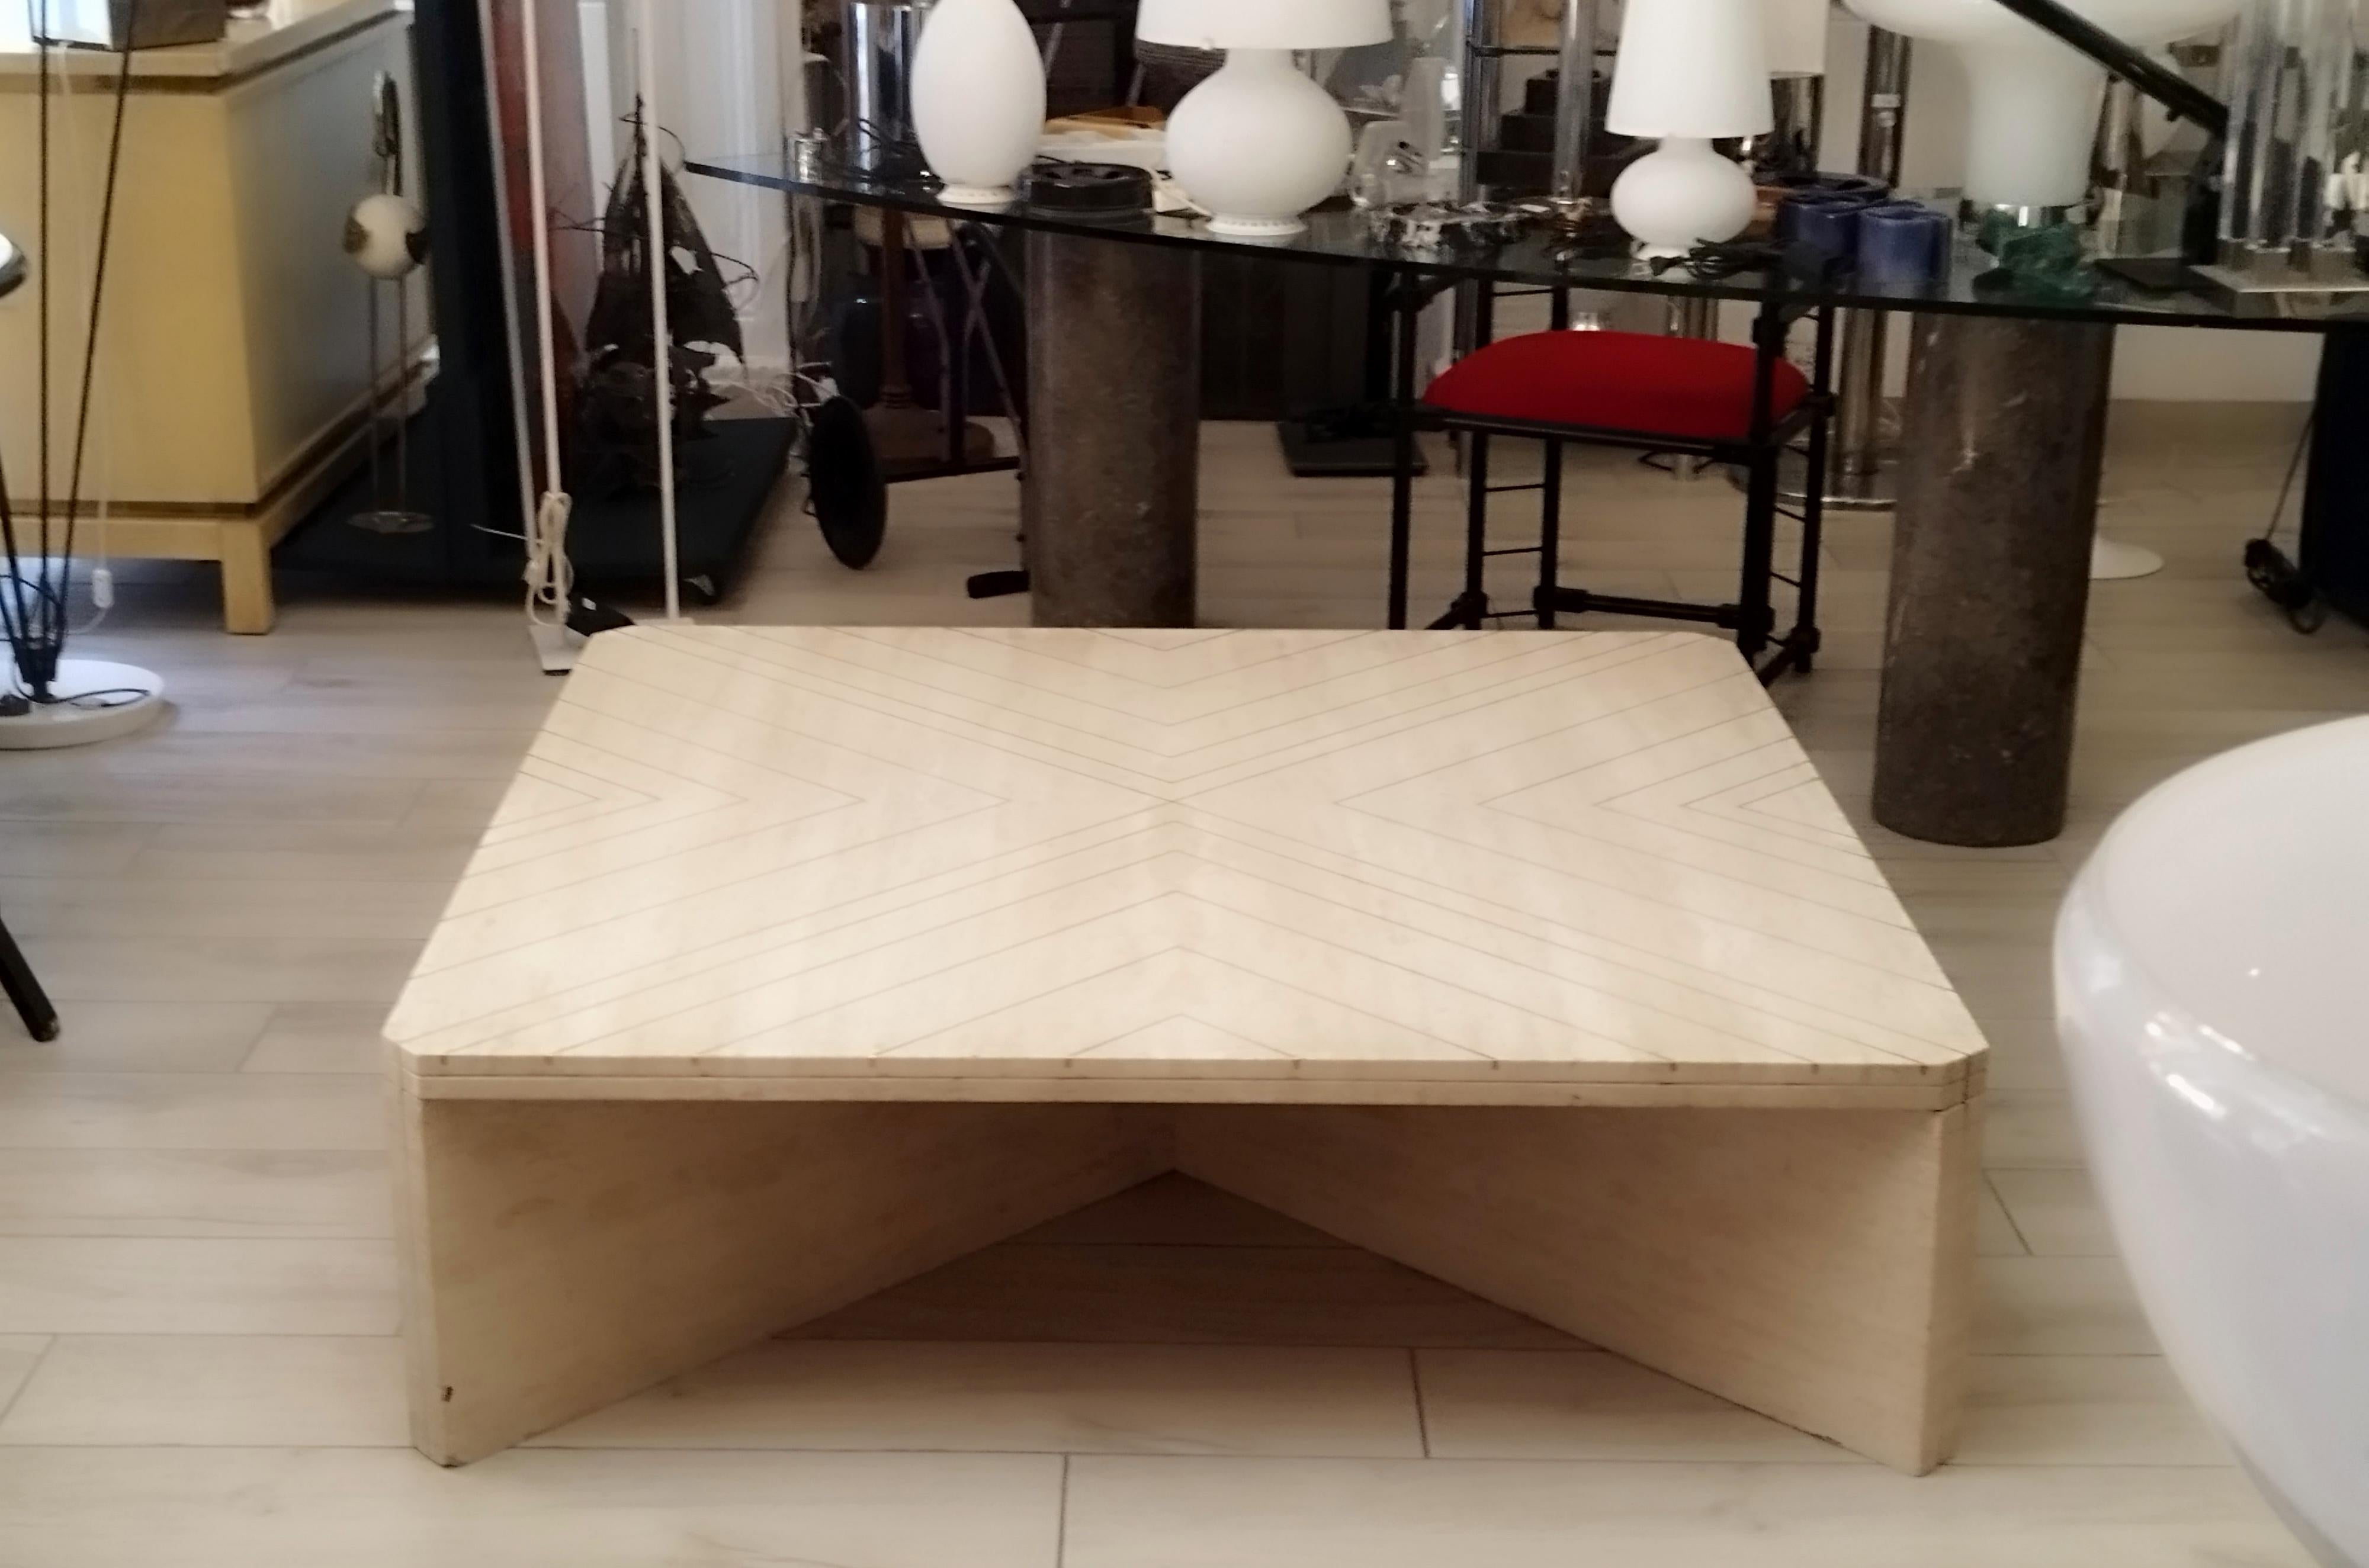 Rare coffee table by Willy Rizzo. The table features a fantastic solid brass arrow motif embedded in travertine. The inlay also runs to the base of the legs. The top is 4 cm thick.